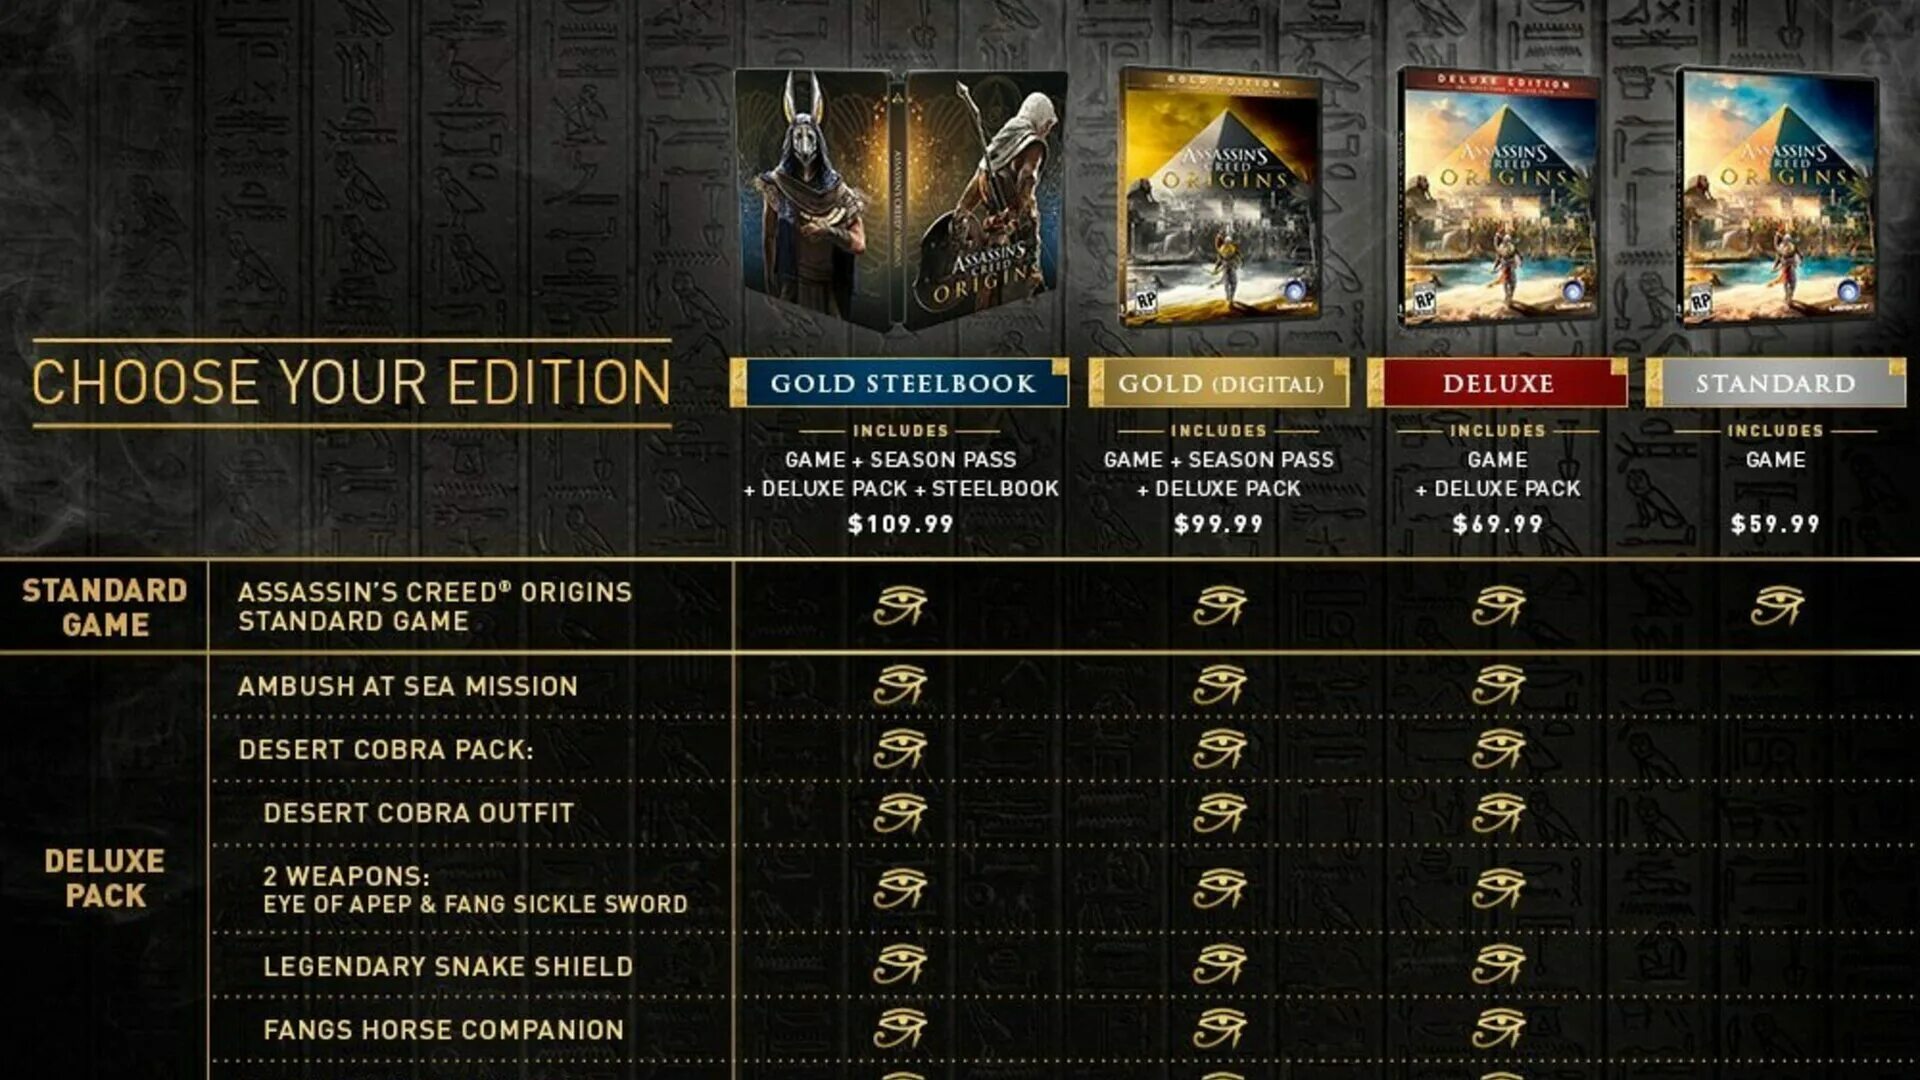 Assassin's Creed Origins. Deluxe Edition. Assassin's Creed Origins Gold Edition. Assassins Creed Истоки Gold Edition. Ассасин Крид Истоки Голд эдишн.